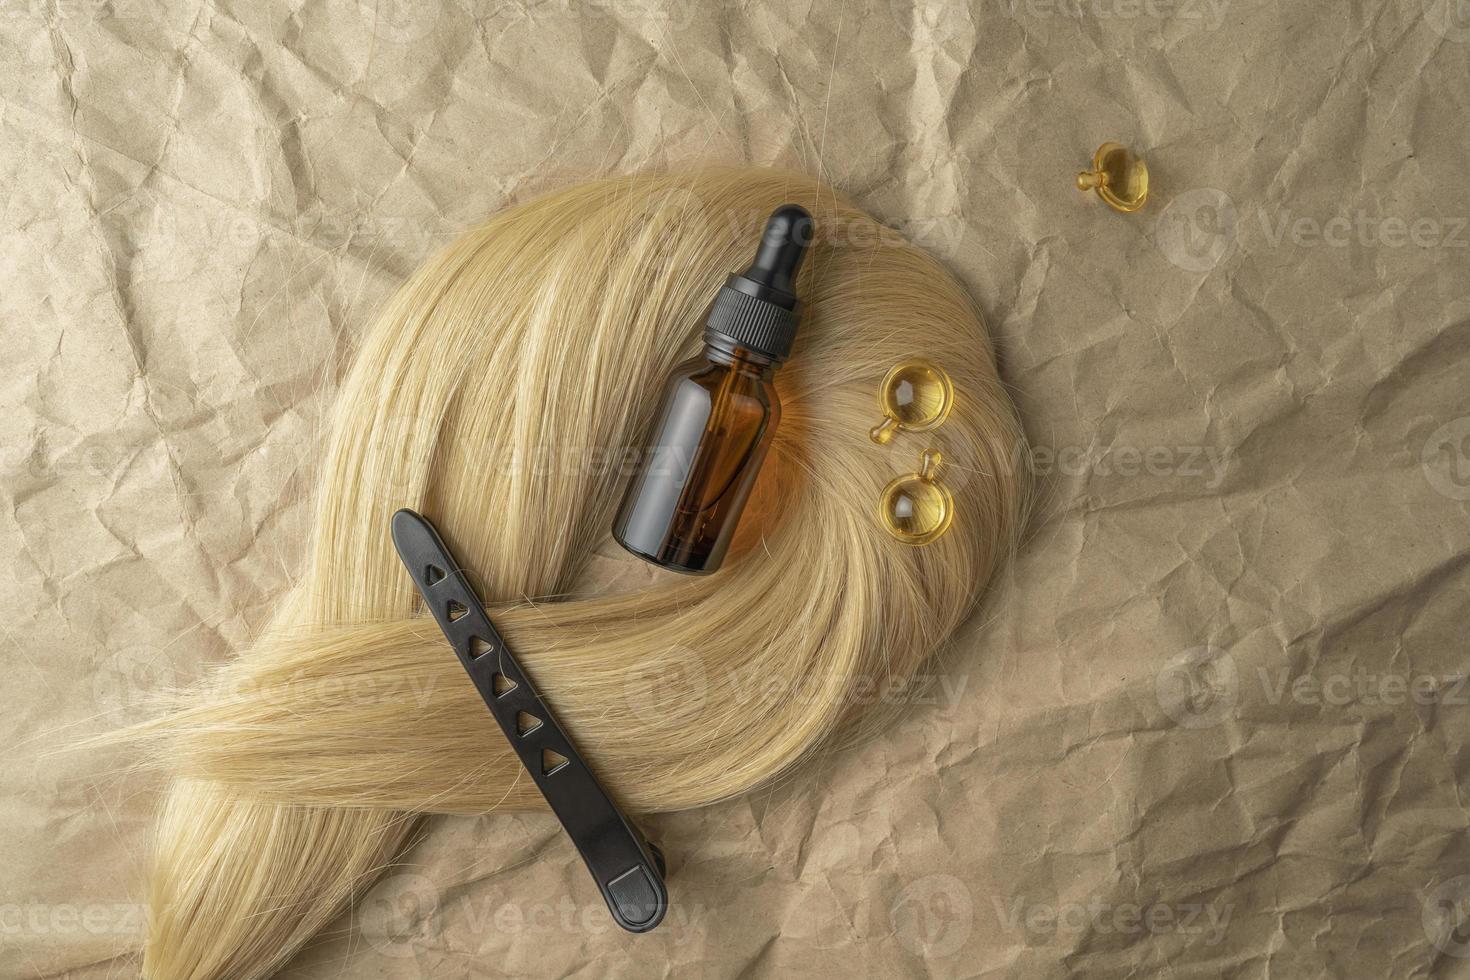 A hair treatment essential oil for smoothing hair and a hair curling styler lying on a brown craft paper background photo